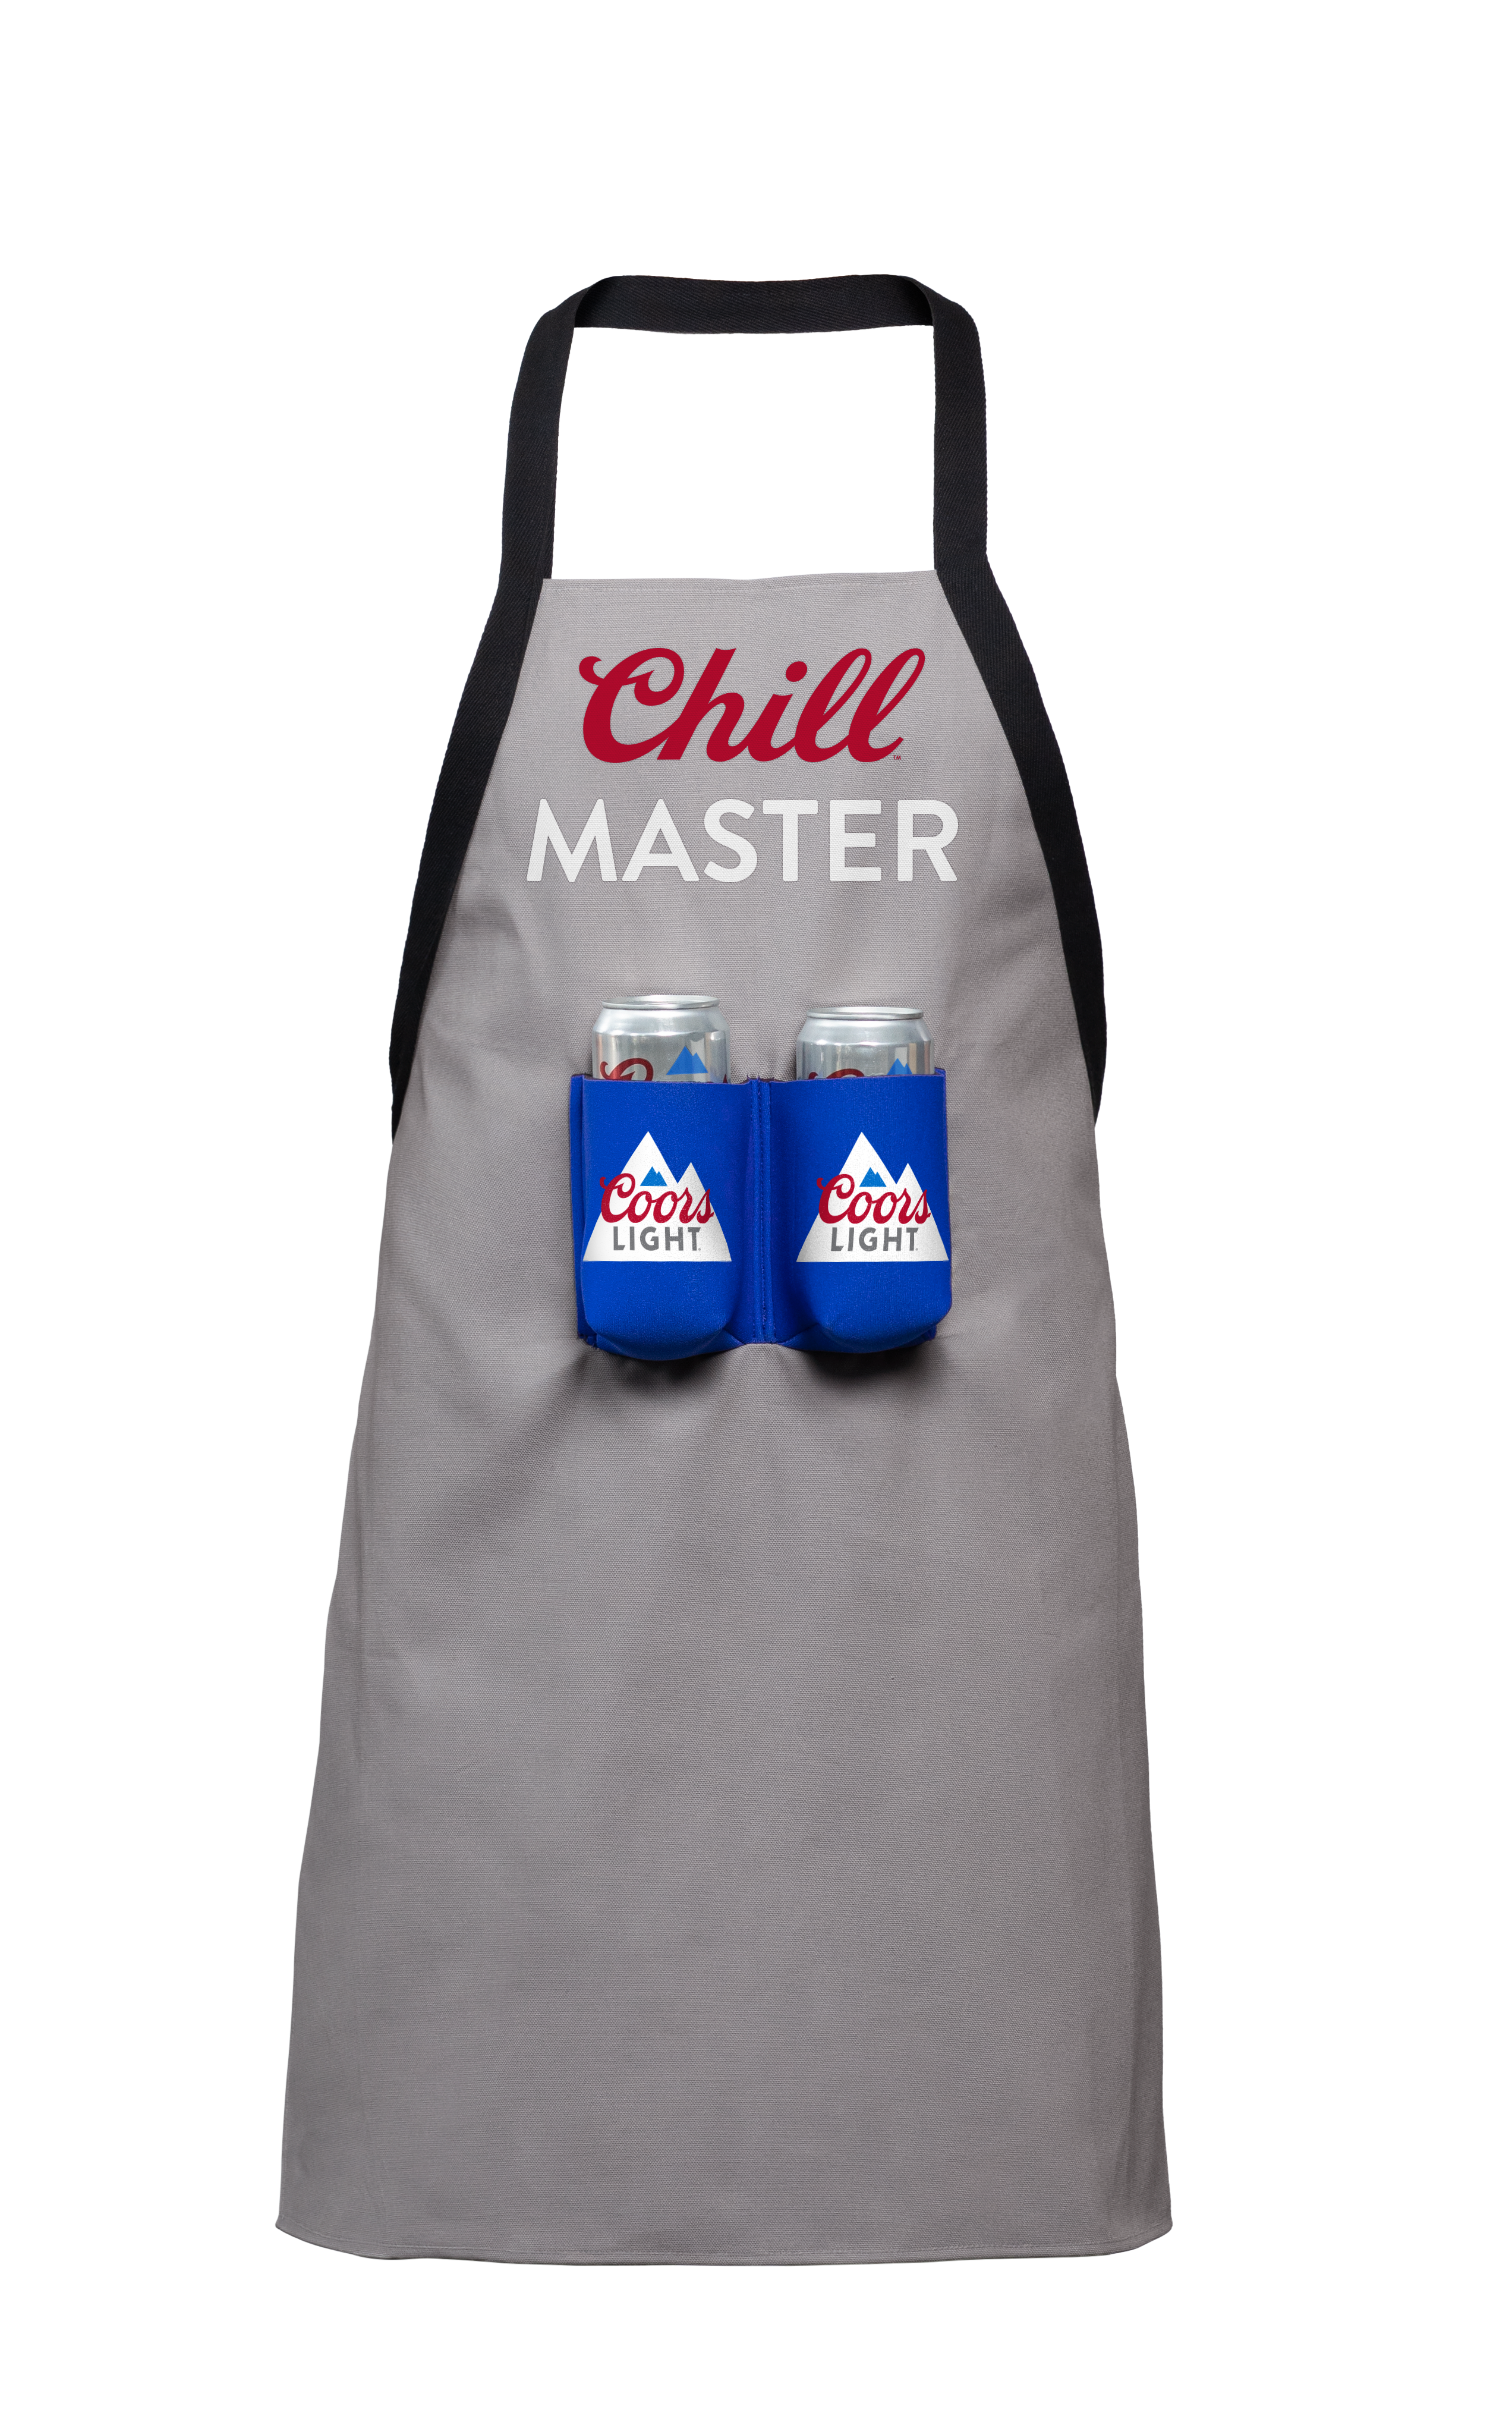 Chill Master Grilling Apron